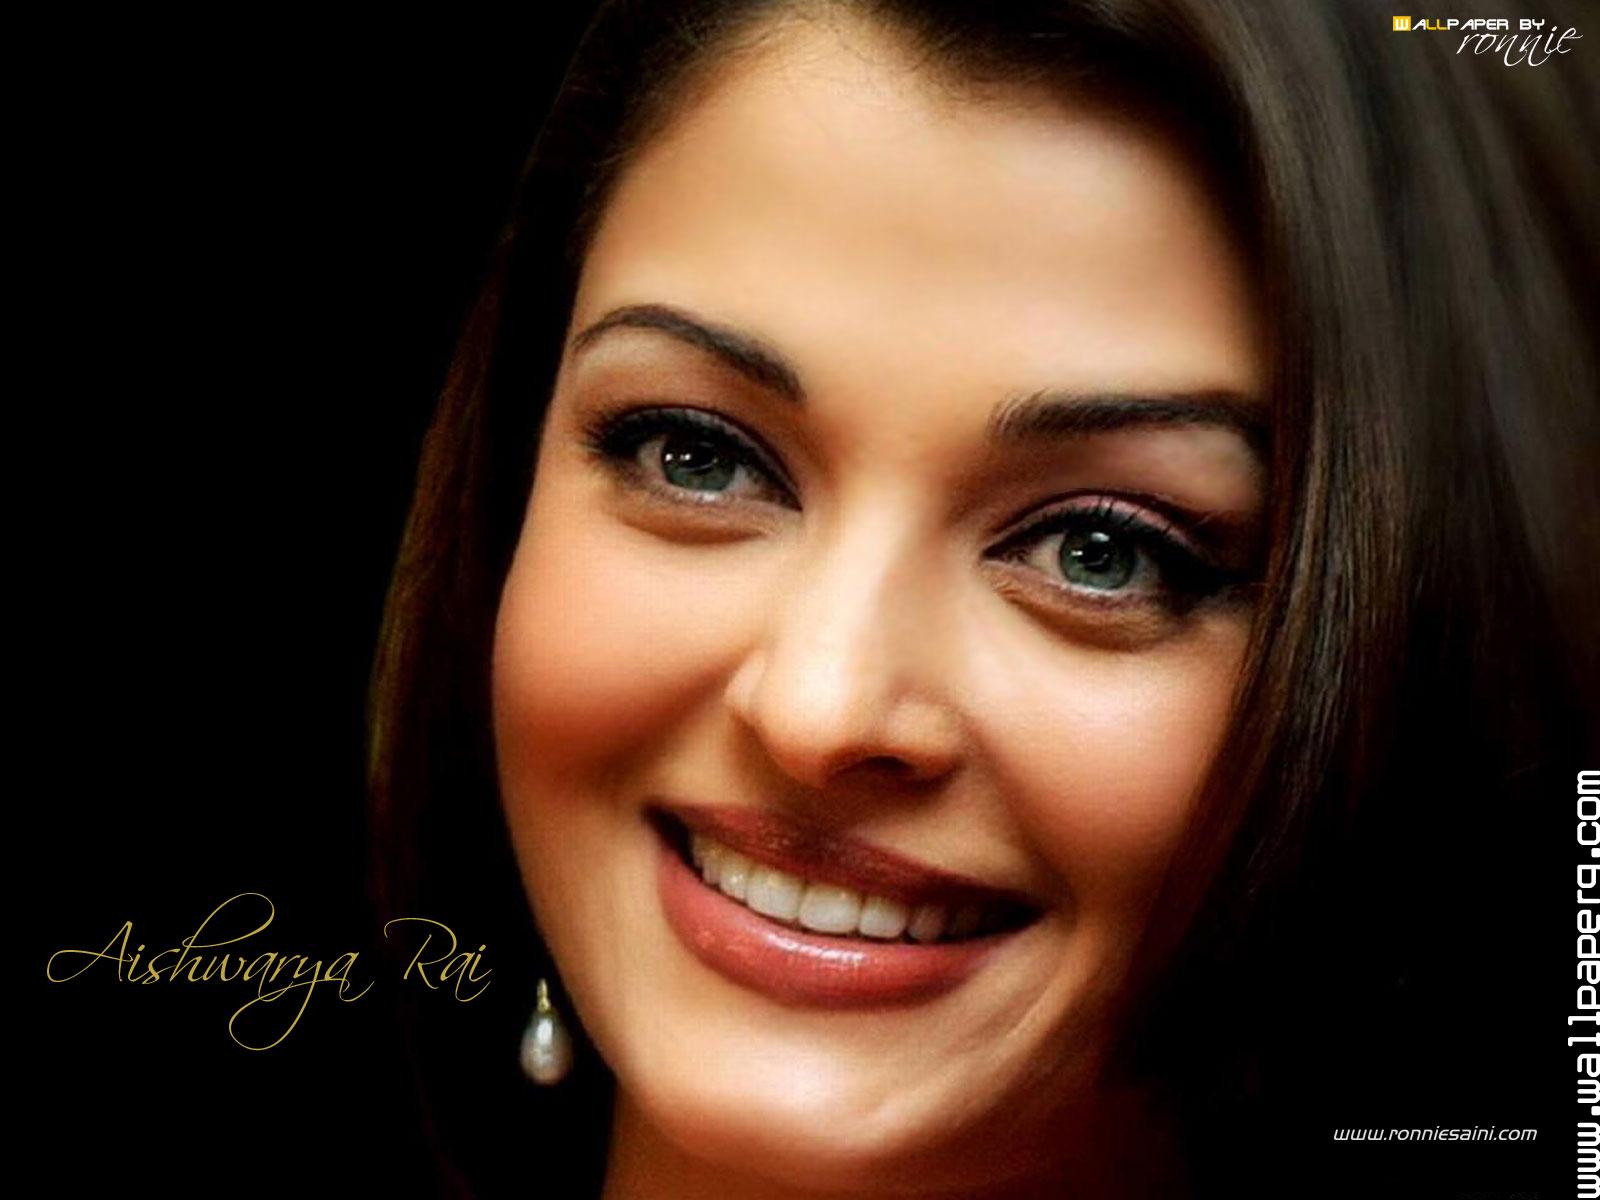 Download Aishwarya rai wallpaper - Cool actress images for your mobile cell  phone